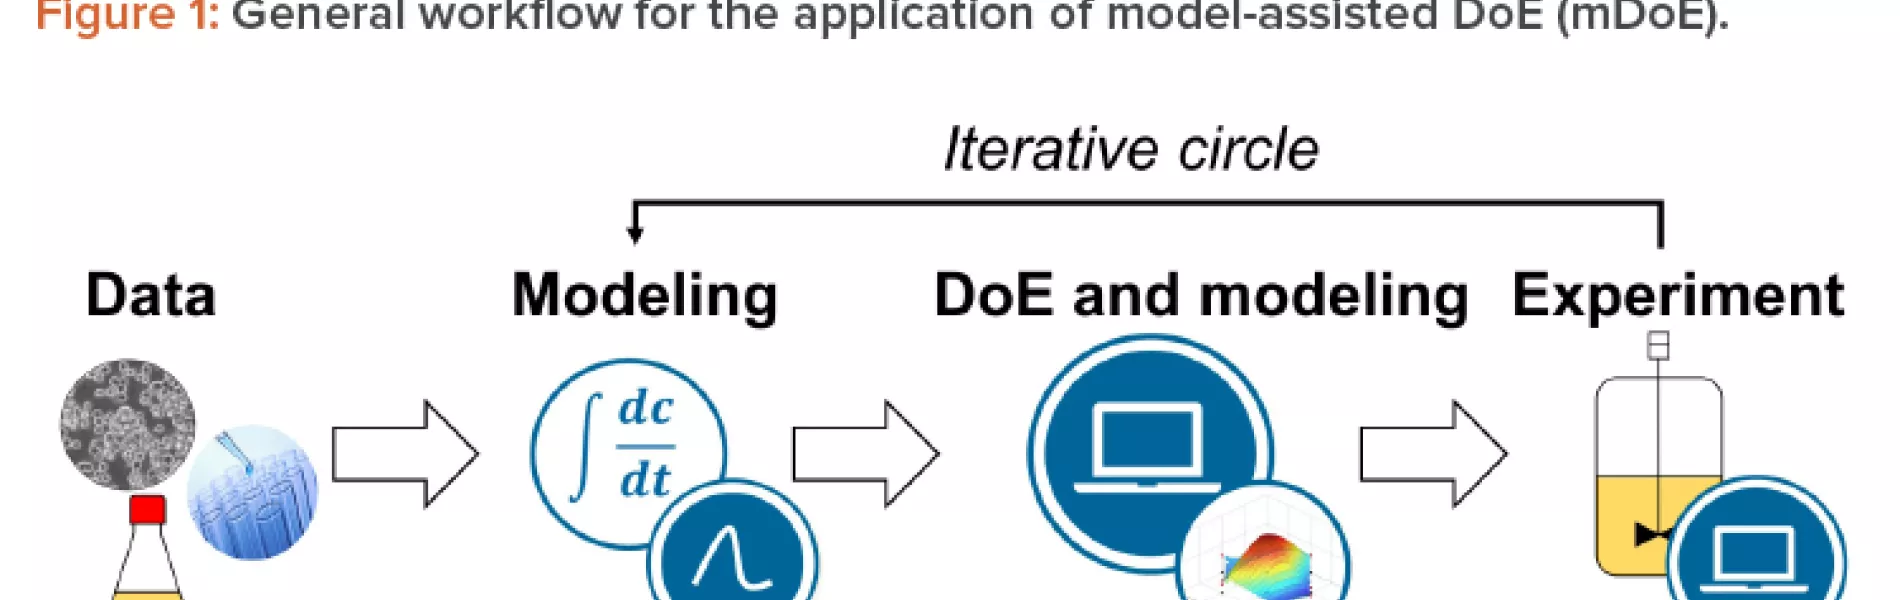 Figure 1: General workfl ow for the application of model-assisted DoE (mDoE).